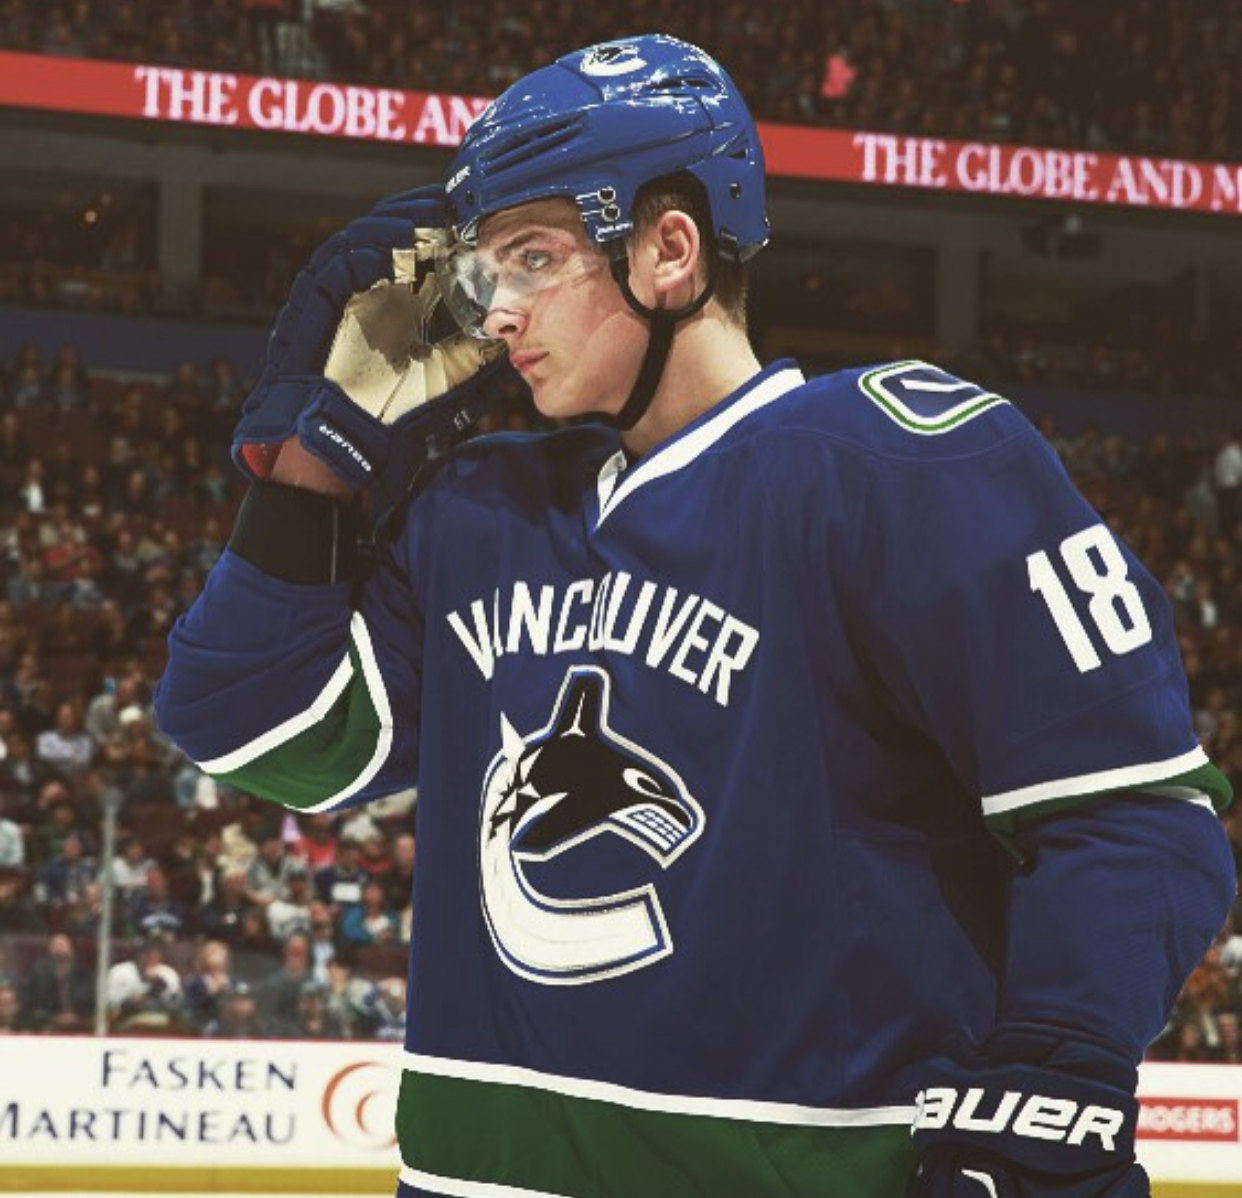 Former Canuck Jake Virtanen Who Was Born & Raised In Abbotsford Has Been Charged With Sexual Assault